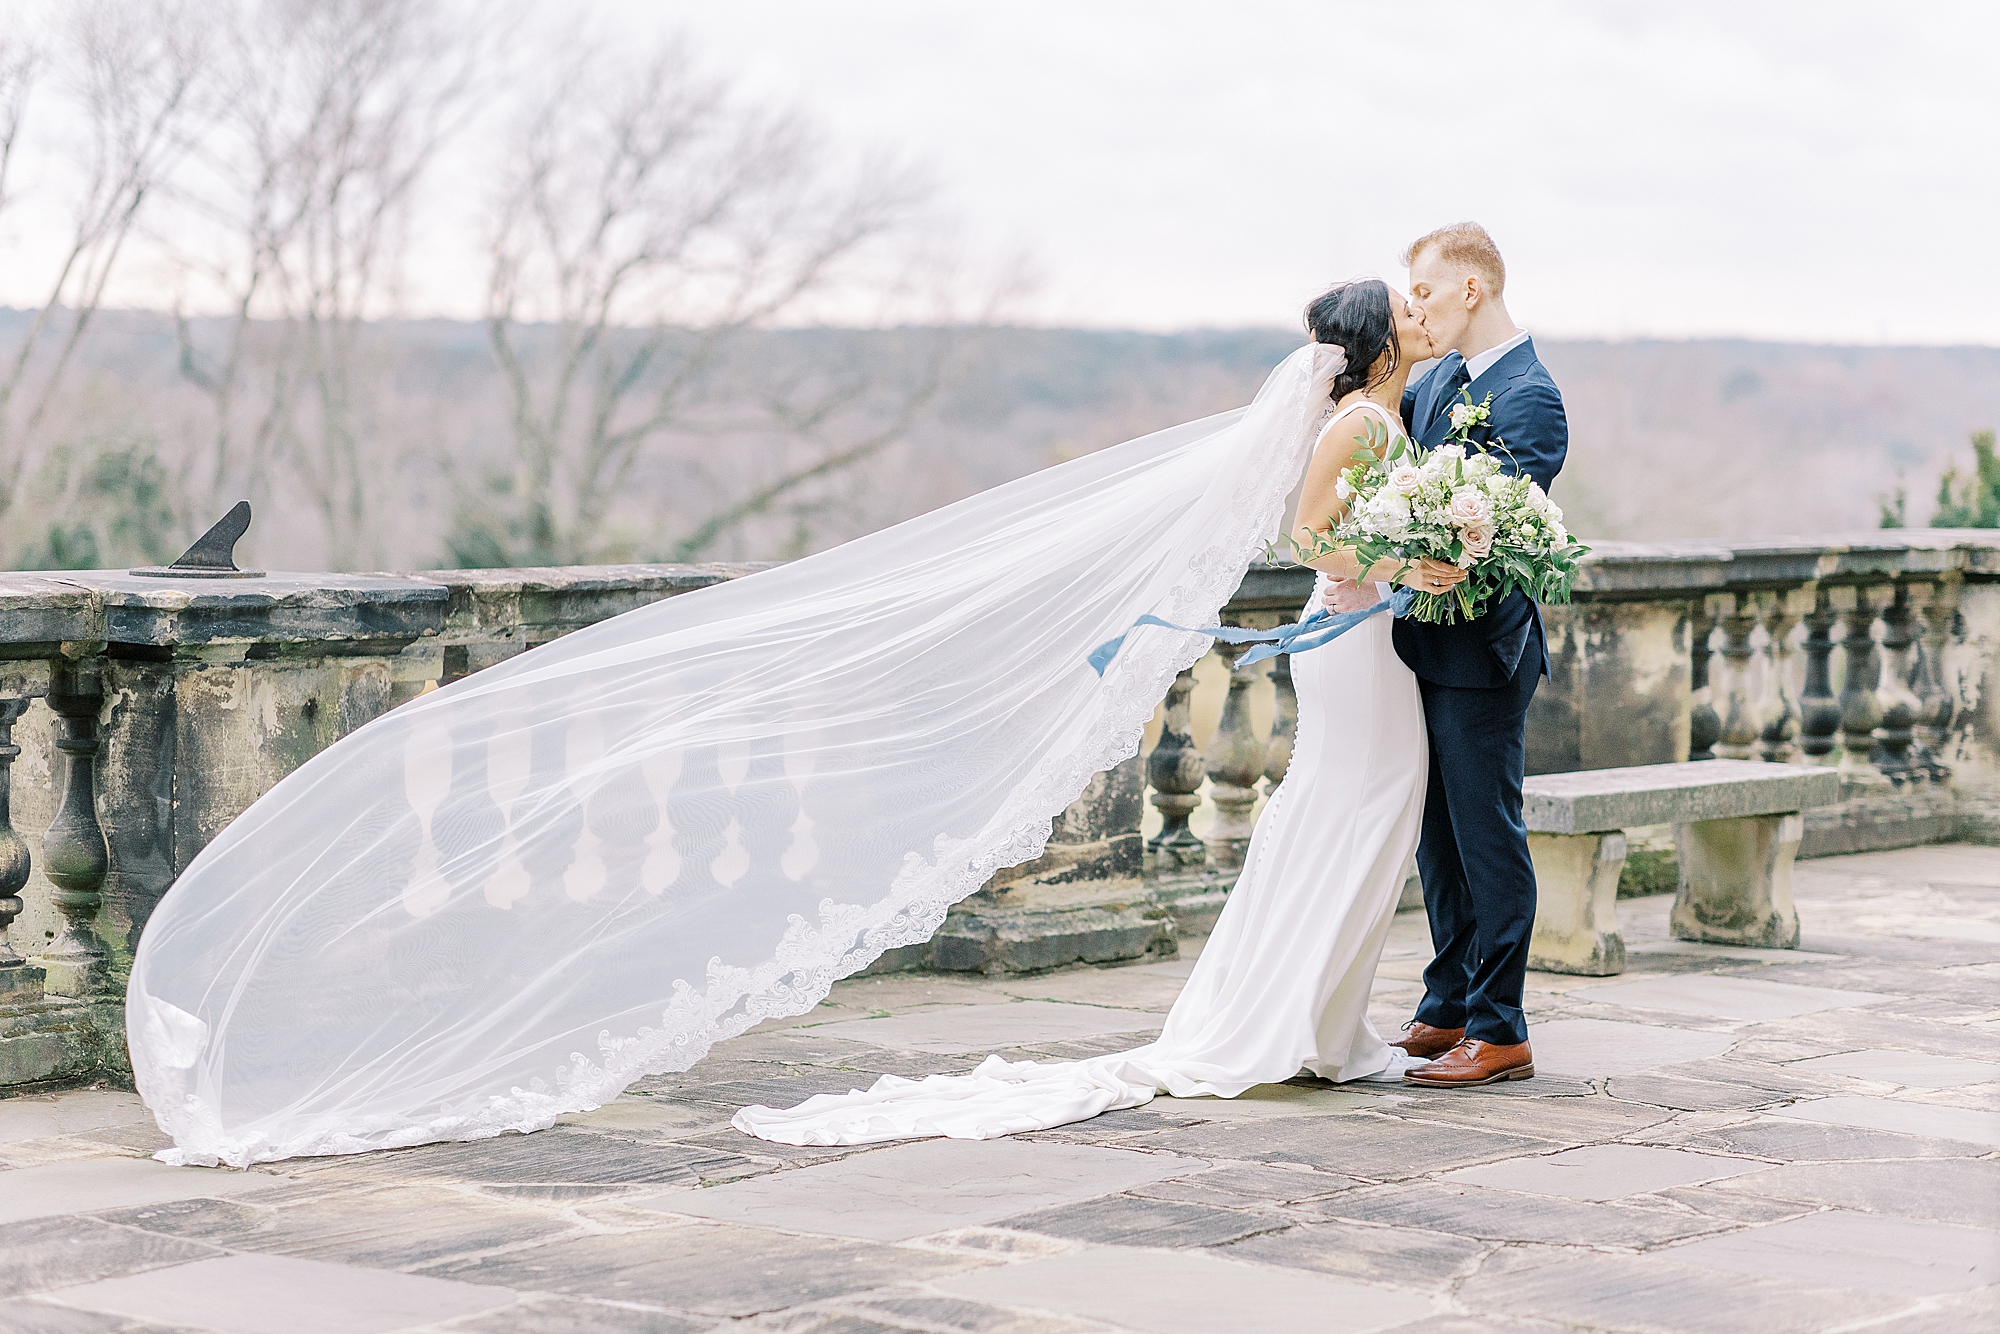 Richmond wedding photographer takes photo of veil flying in wind as bride kisses groom.